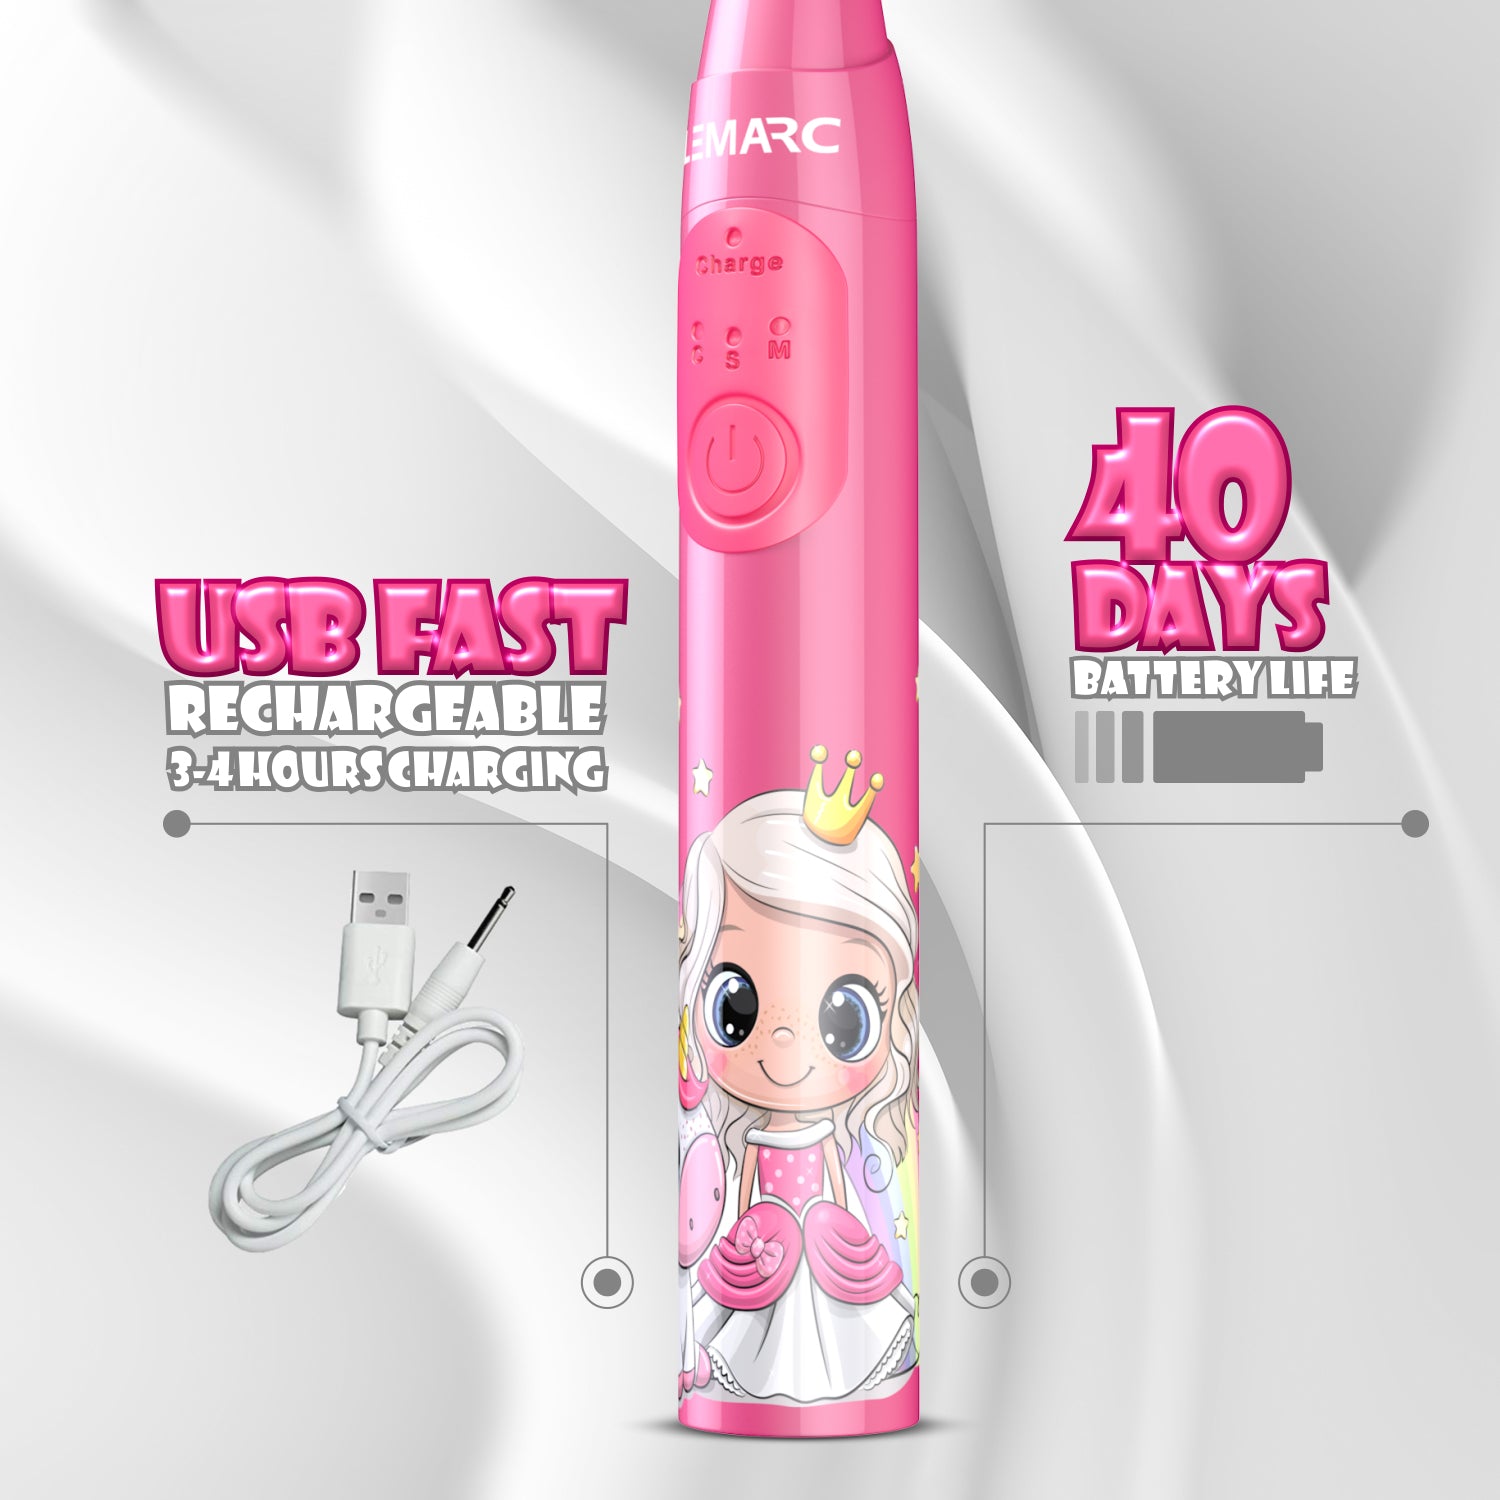 LEMARC USA Supersonic Kids Electric Toothbrush 8 Dupont Brush Heads, USB Rechargeable, Vibration Speed Control Plus Massage Mode, 2 Min Timer, Waterproof, for Age 3+ (Pink)